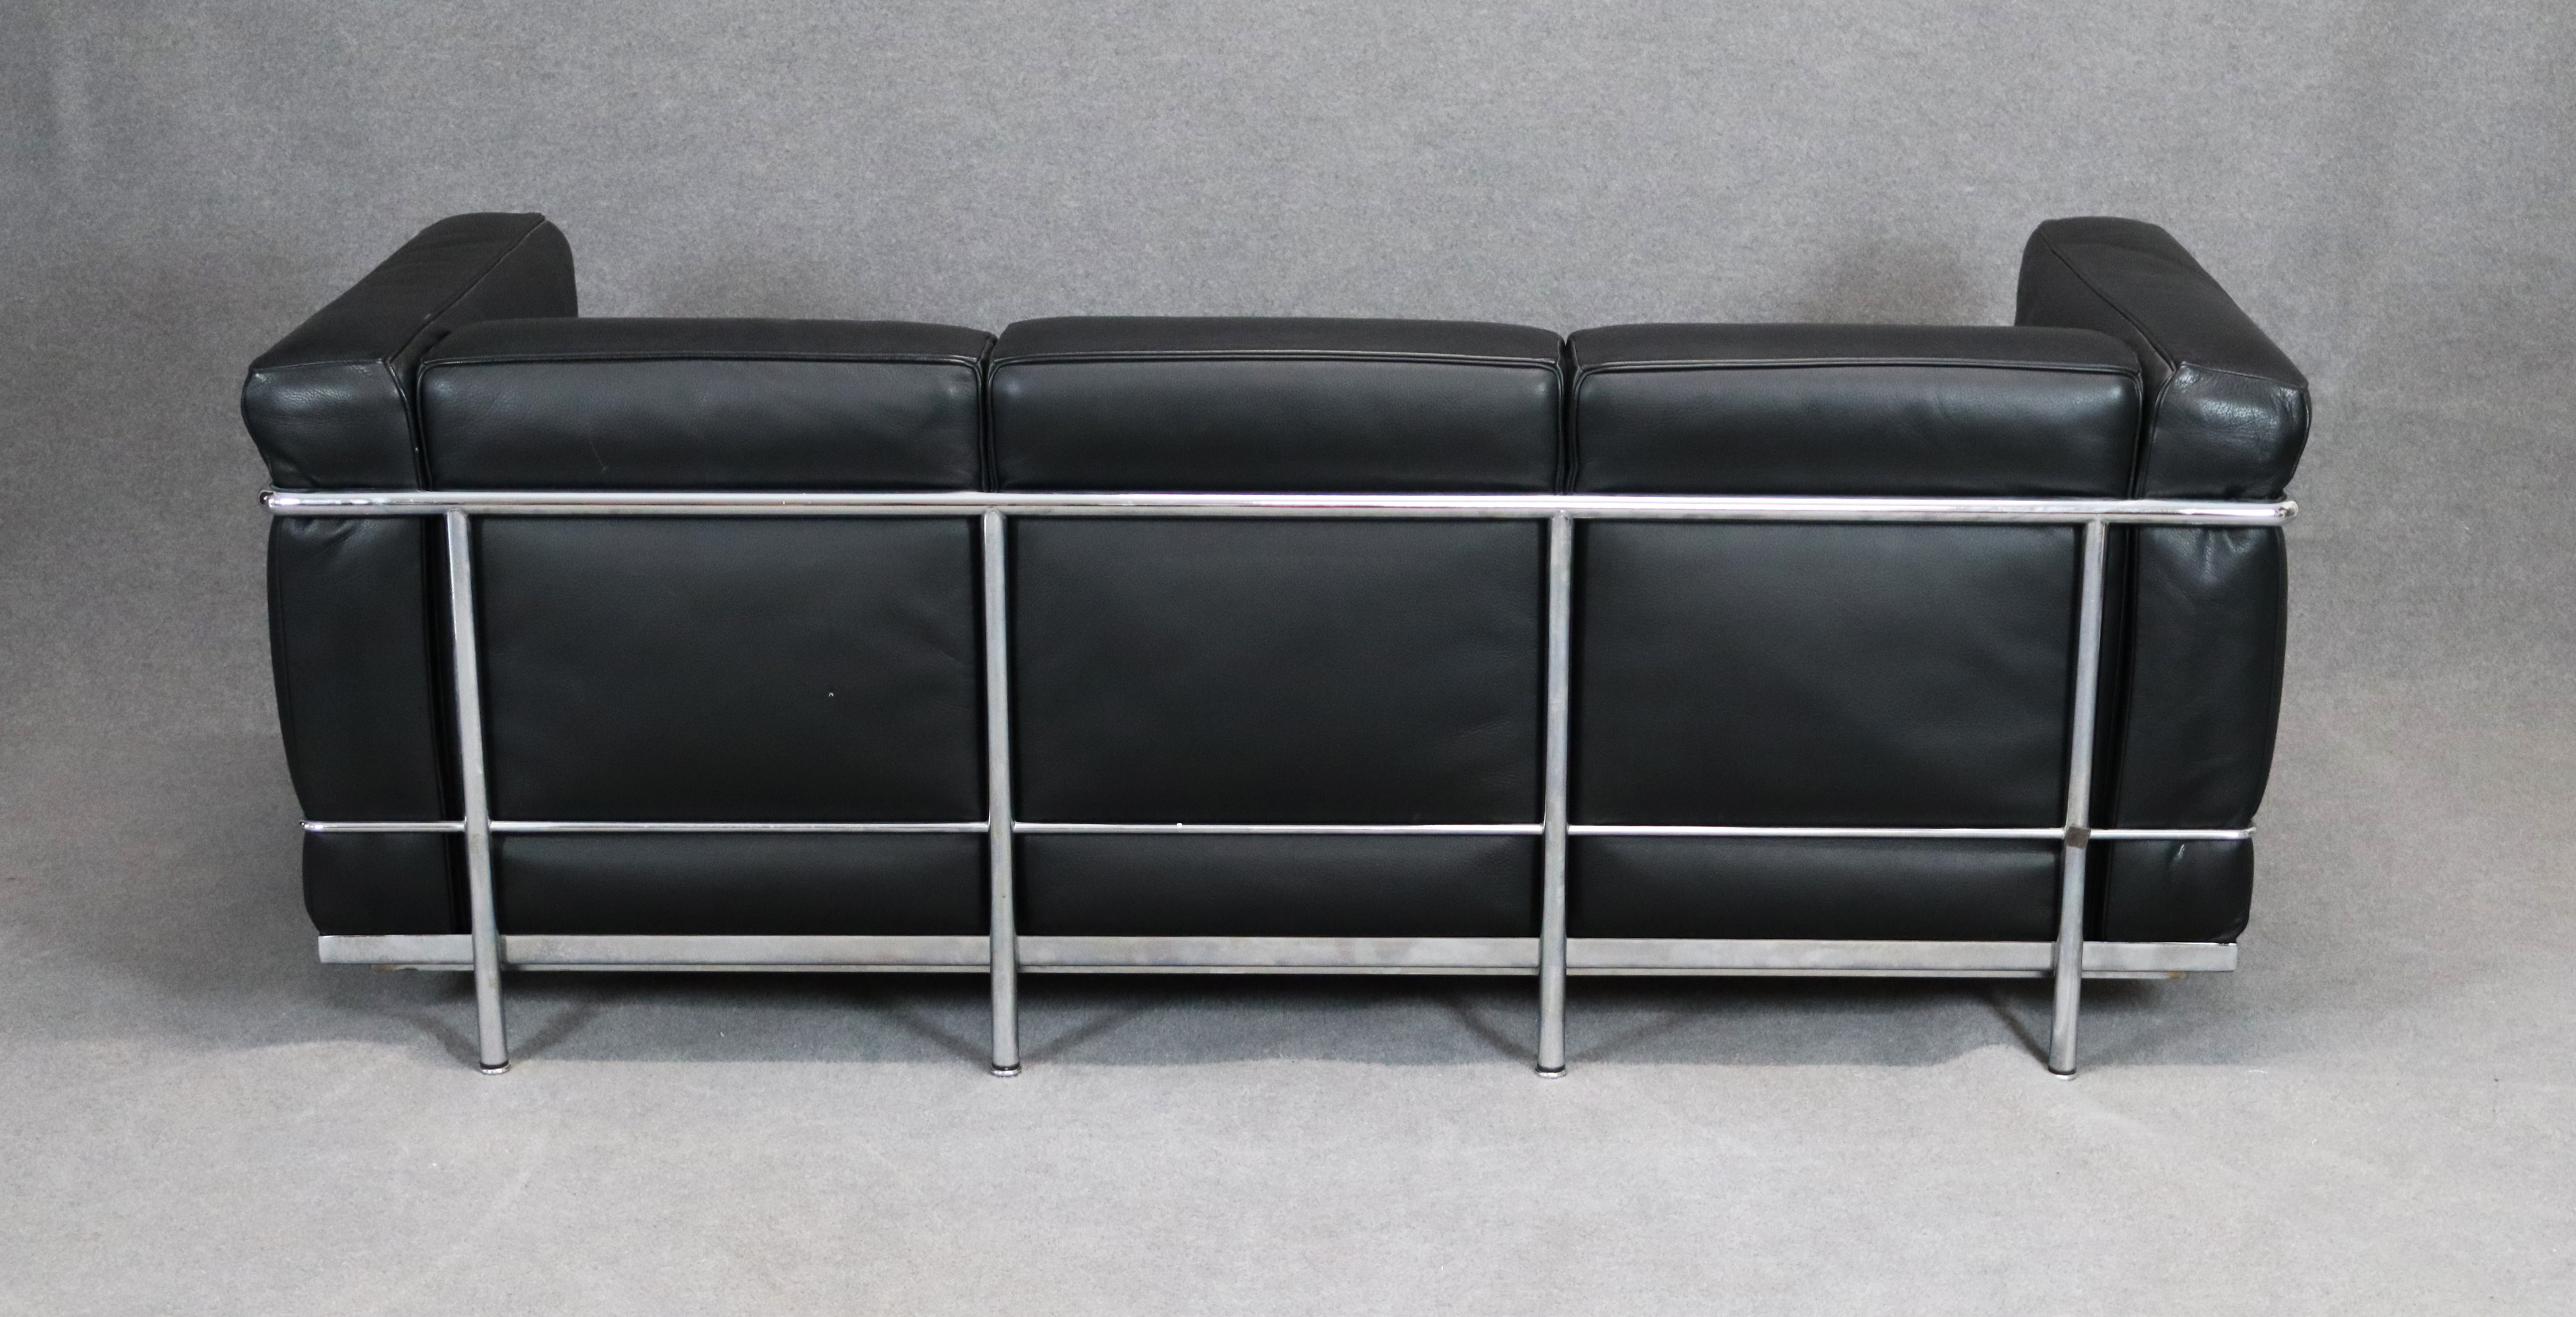 CASSINA. LC2 chrome steel and leather sofa - Image 3 of 5